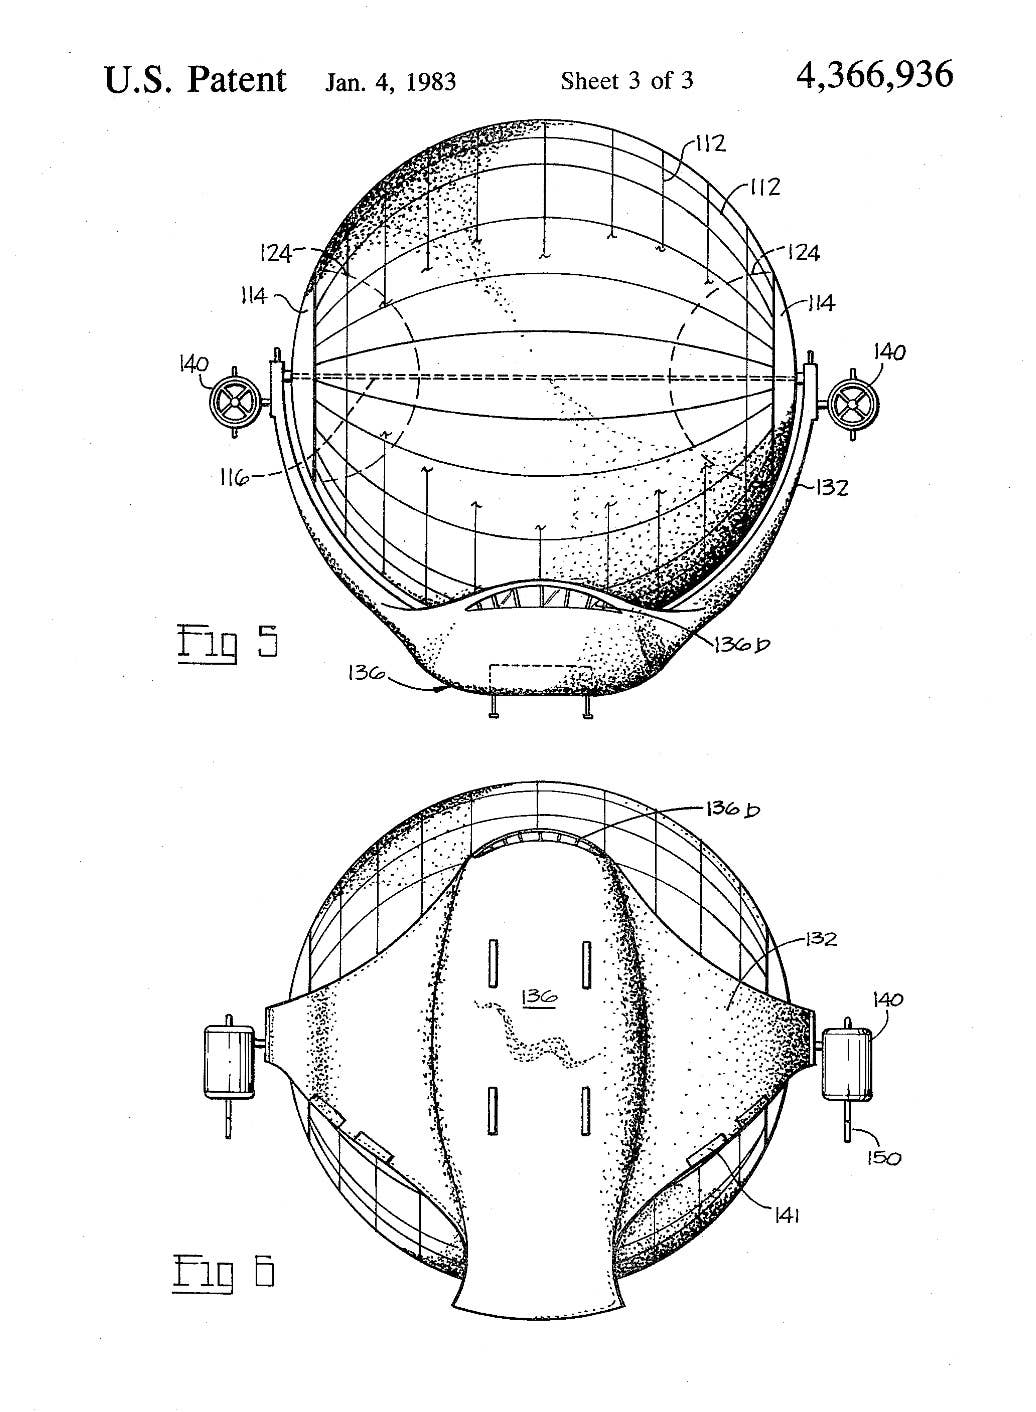 Front and rear view of the aerostat seen in the patent. <em>Frederick D. Ferguson </em>